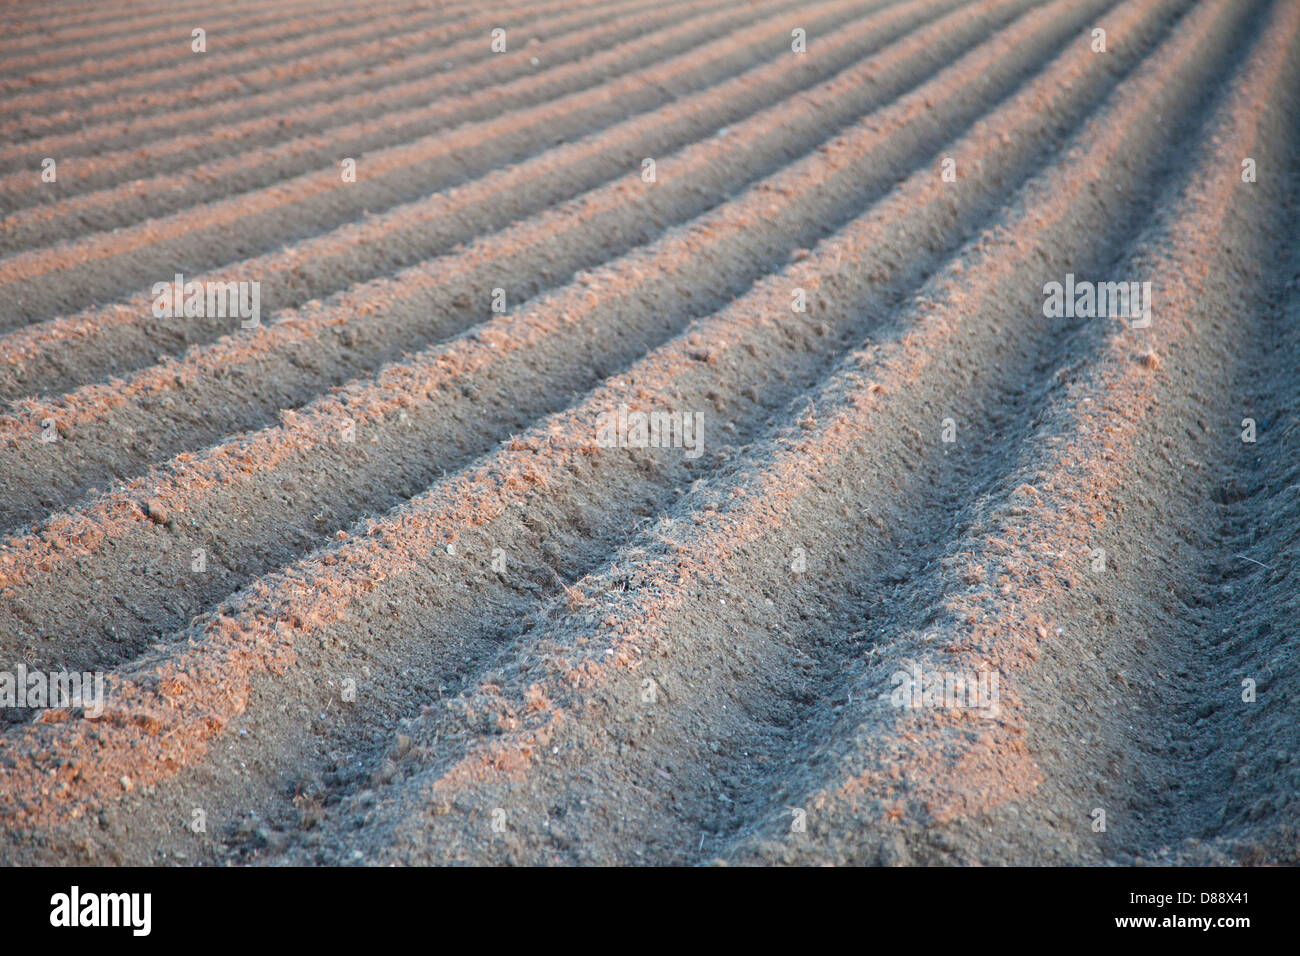 View at agricultural landscape with pattern Stock Photo